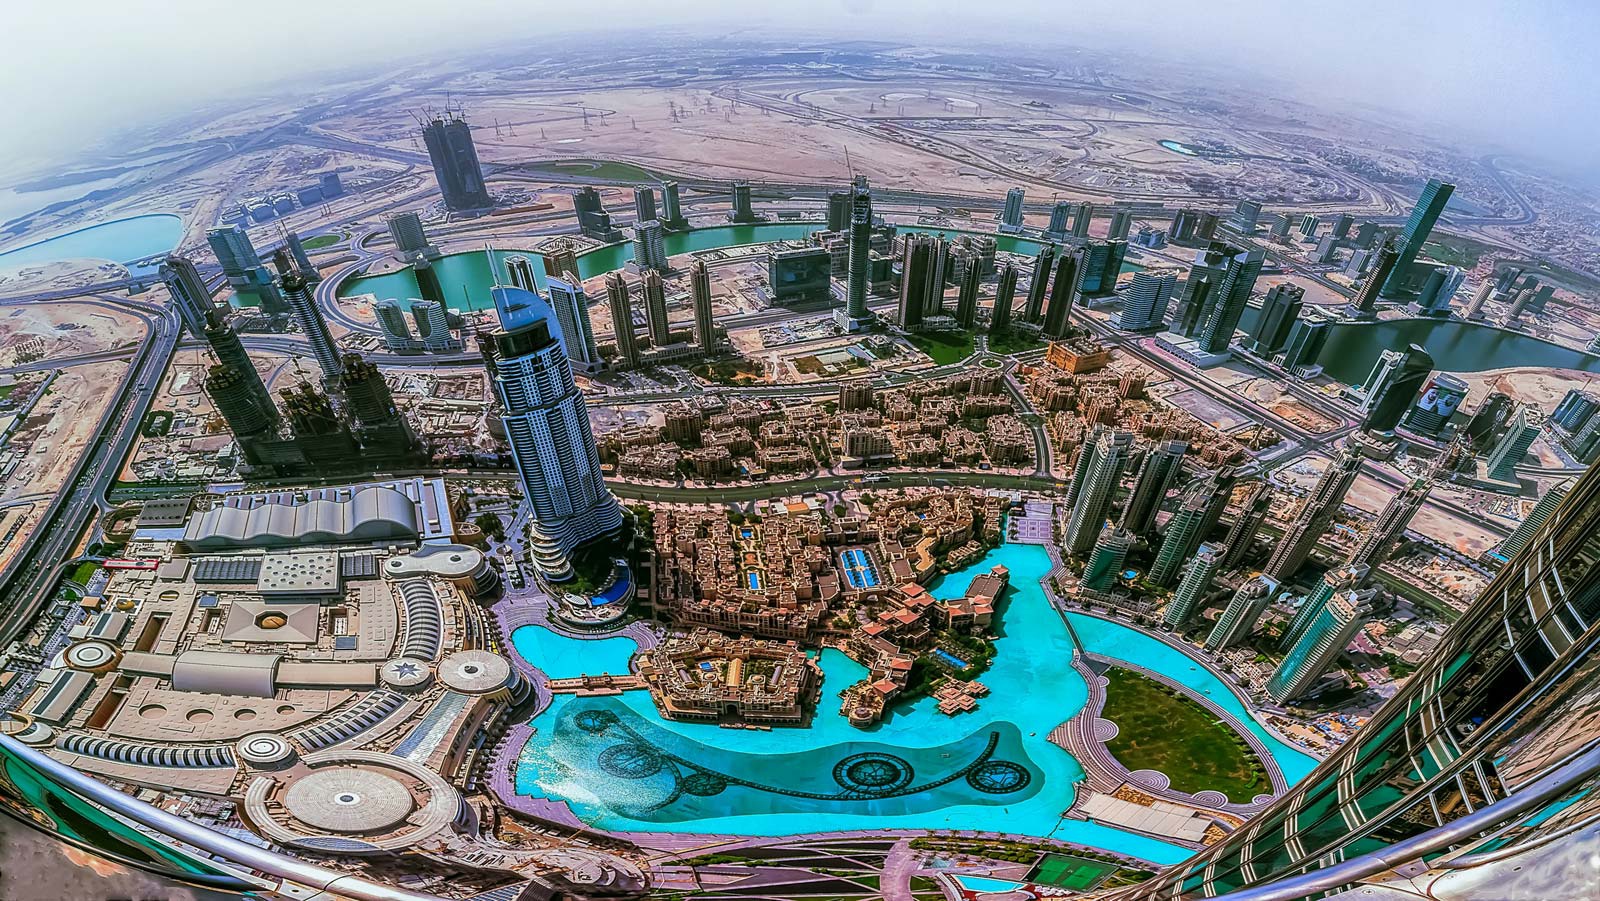 Expats in UAE – Why is the UAE a good choice?